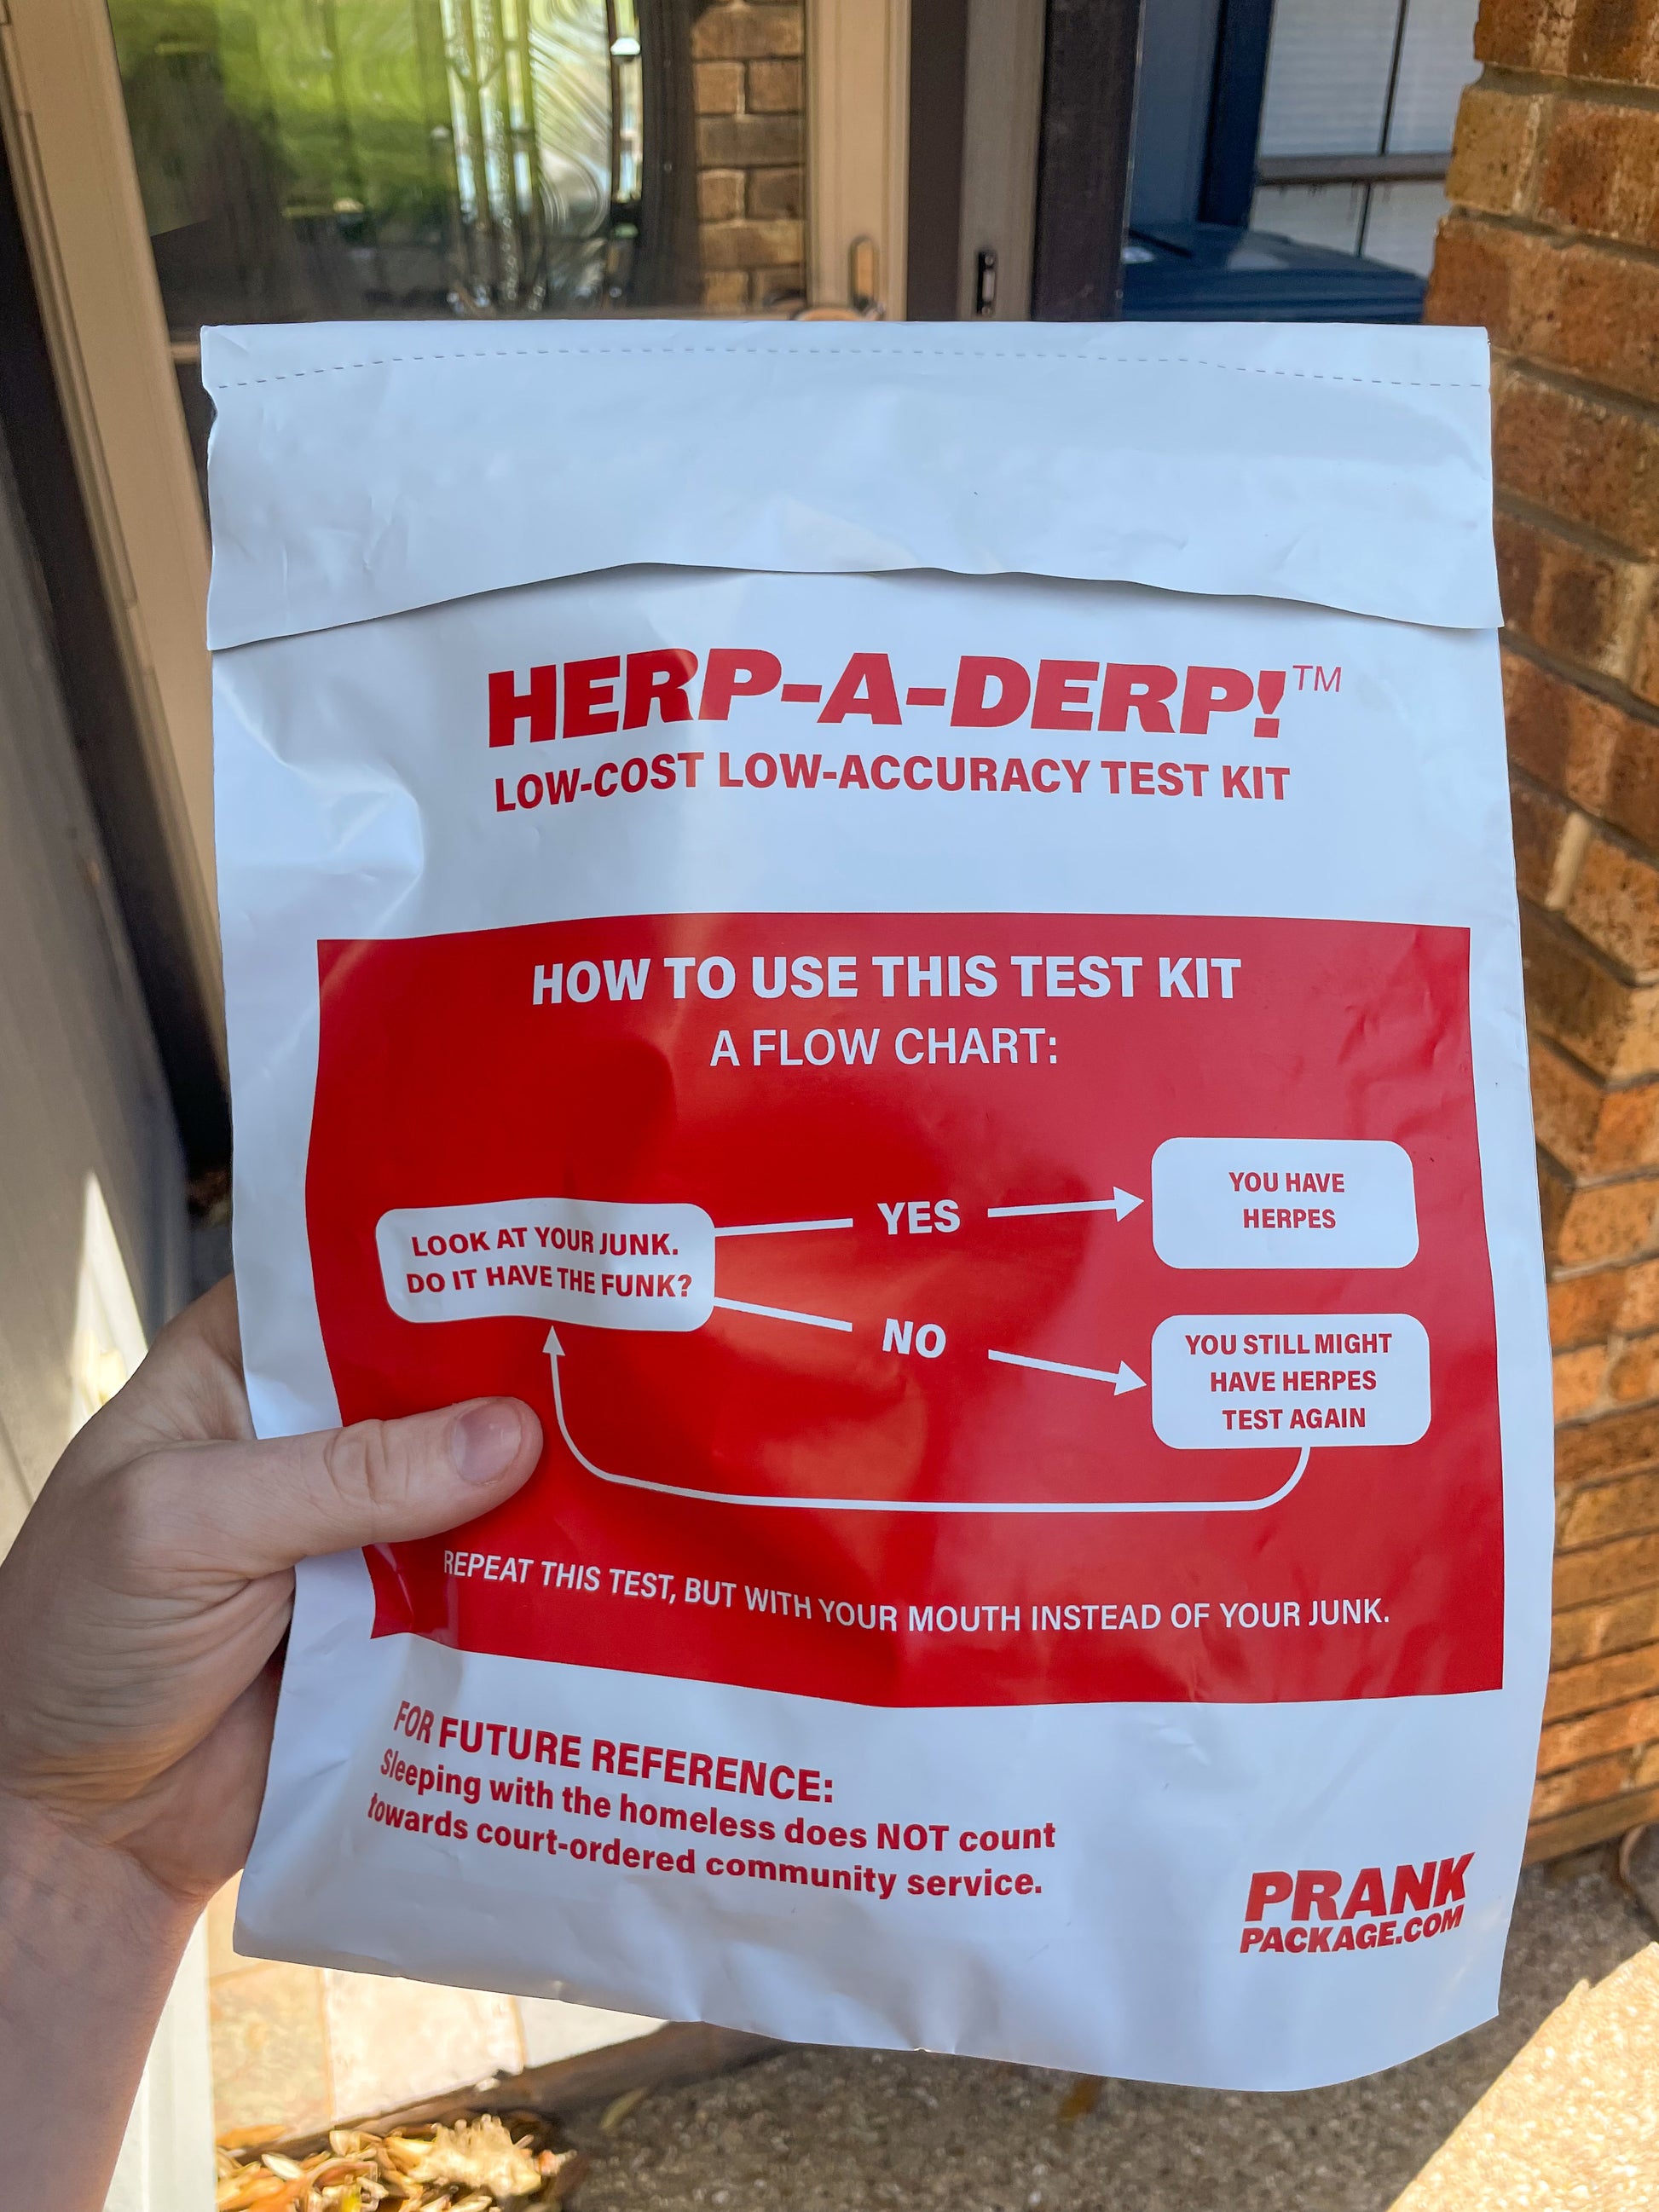 The point of view of someone reading the back of the Herp-A-Derp Herpes Test Kit prank package. "Low-cost Low-accuracy Test Kit" is printed in large red font across the back.